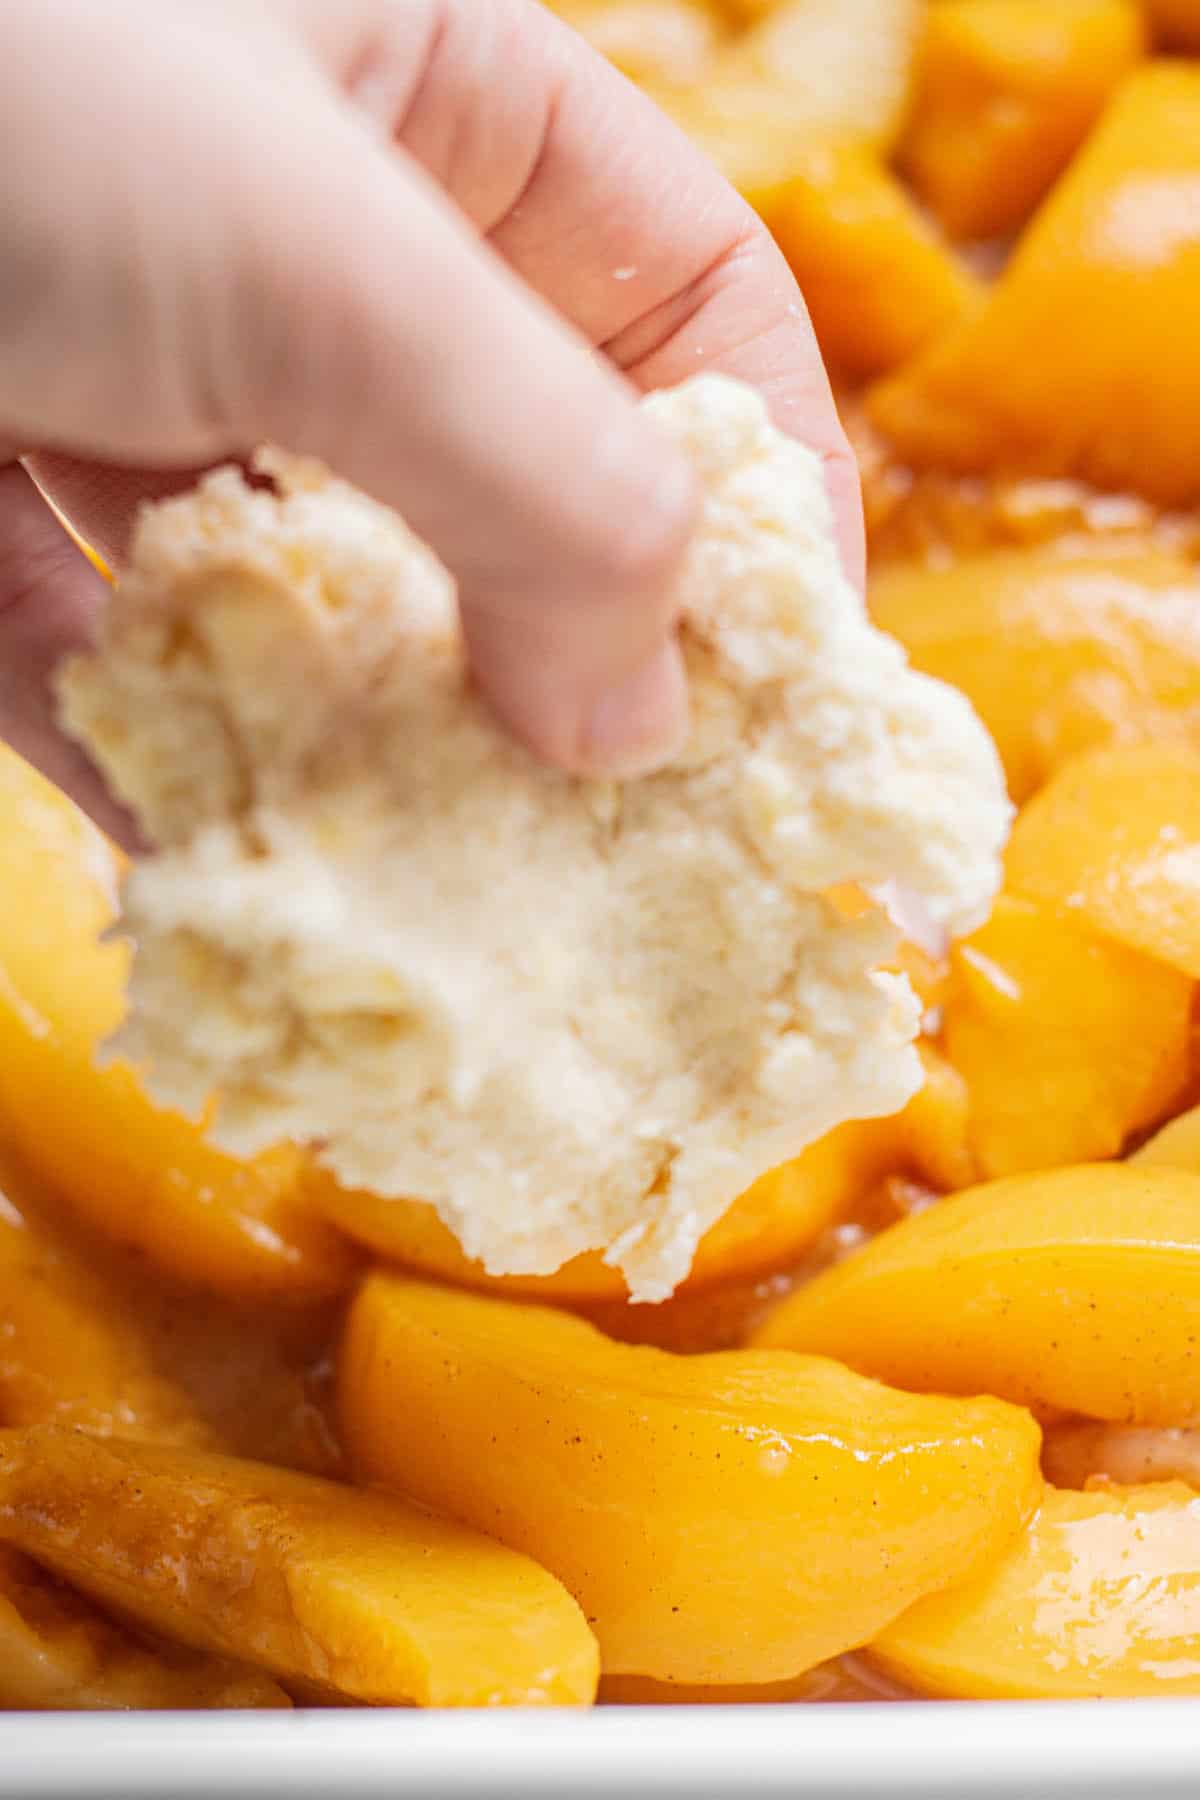 a hand laying a biscuit on peaches.